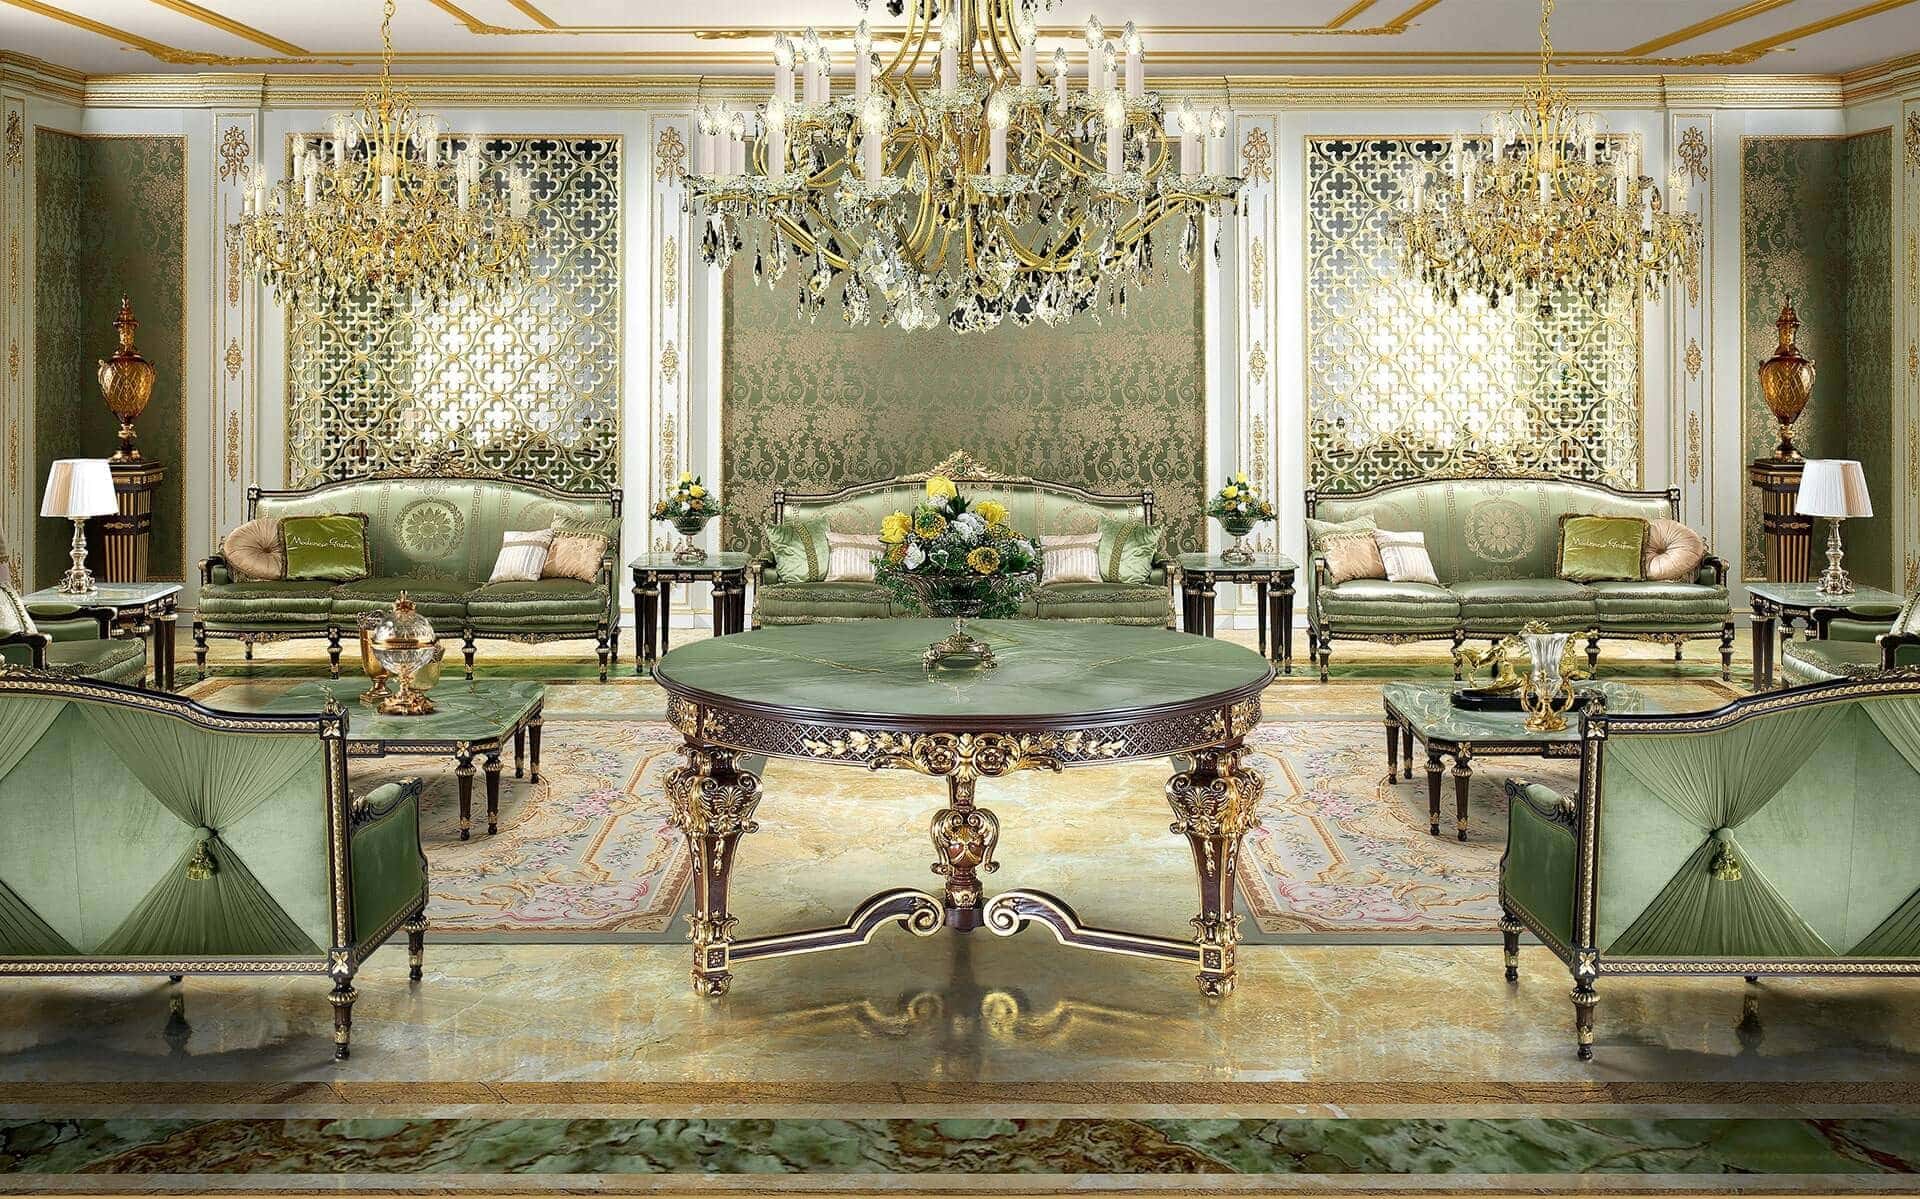 High-end quality and made in Italy solid wood classic luxury furniture manufacturing: handmade double-sided carved sofas and armchairs, elegant coffee tables with green onyx top for the most royal palaces living rooms and majlis proposals. The best ideas for empire style exclusive design and bespoke interiors. Selected green fabric majlis with the most sophisticated ornamental details and materials. Handmade golden leaf application. High-end quality made in Italy furniture craftsmanship.